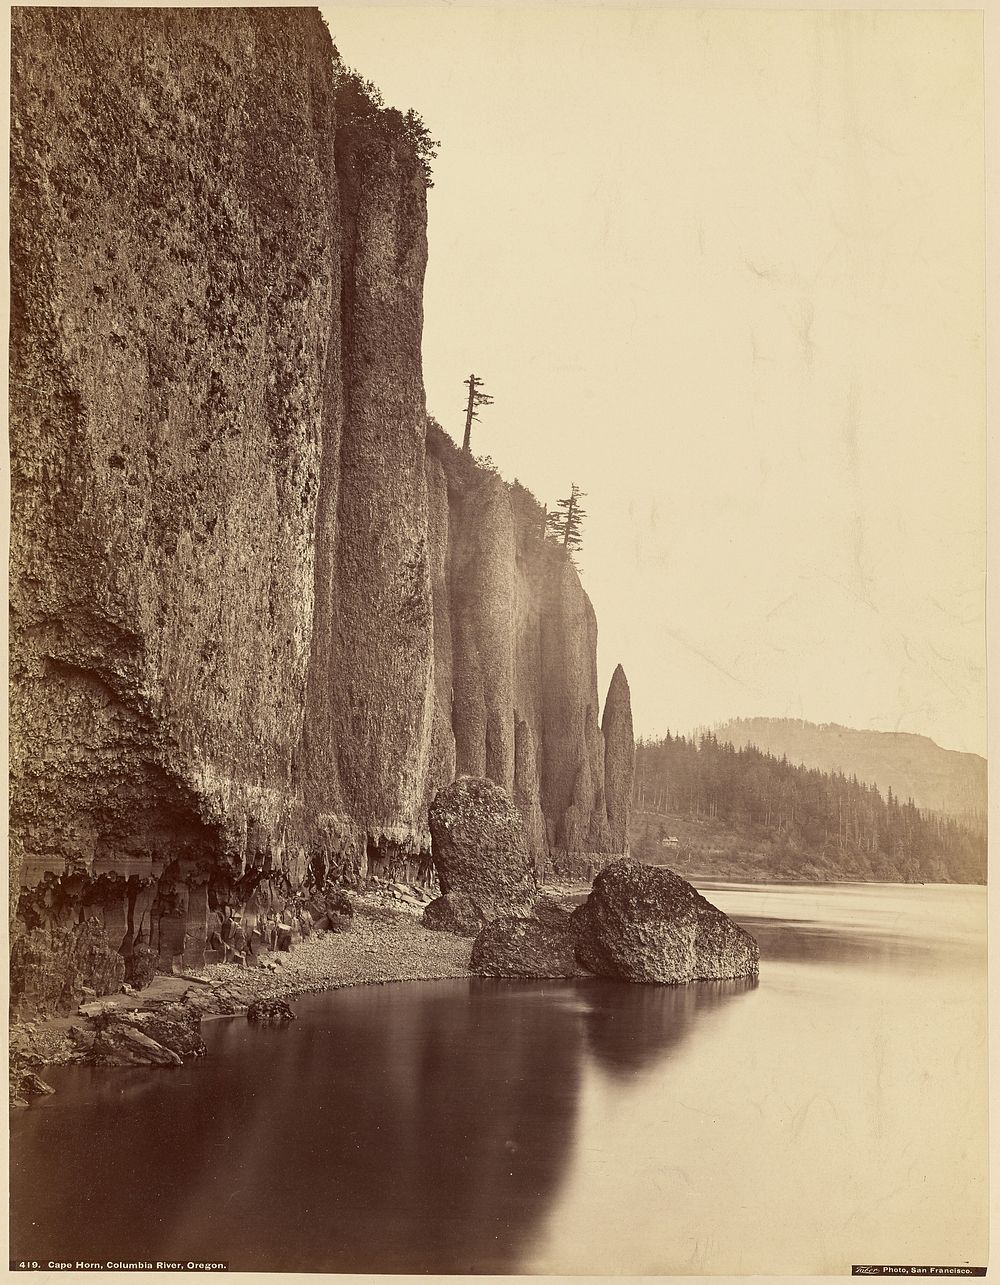 Cape Horn, Columbia River, Oregon. by Carleton Watkins and I W Taber